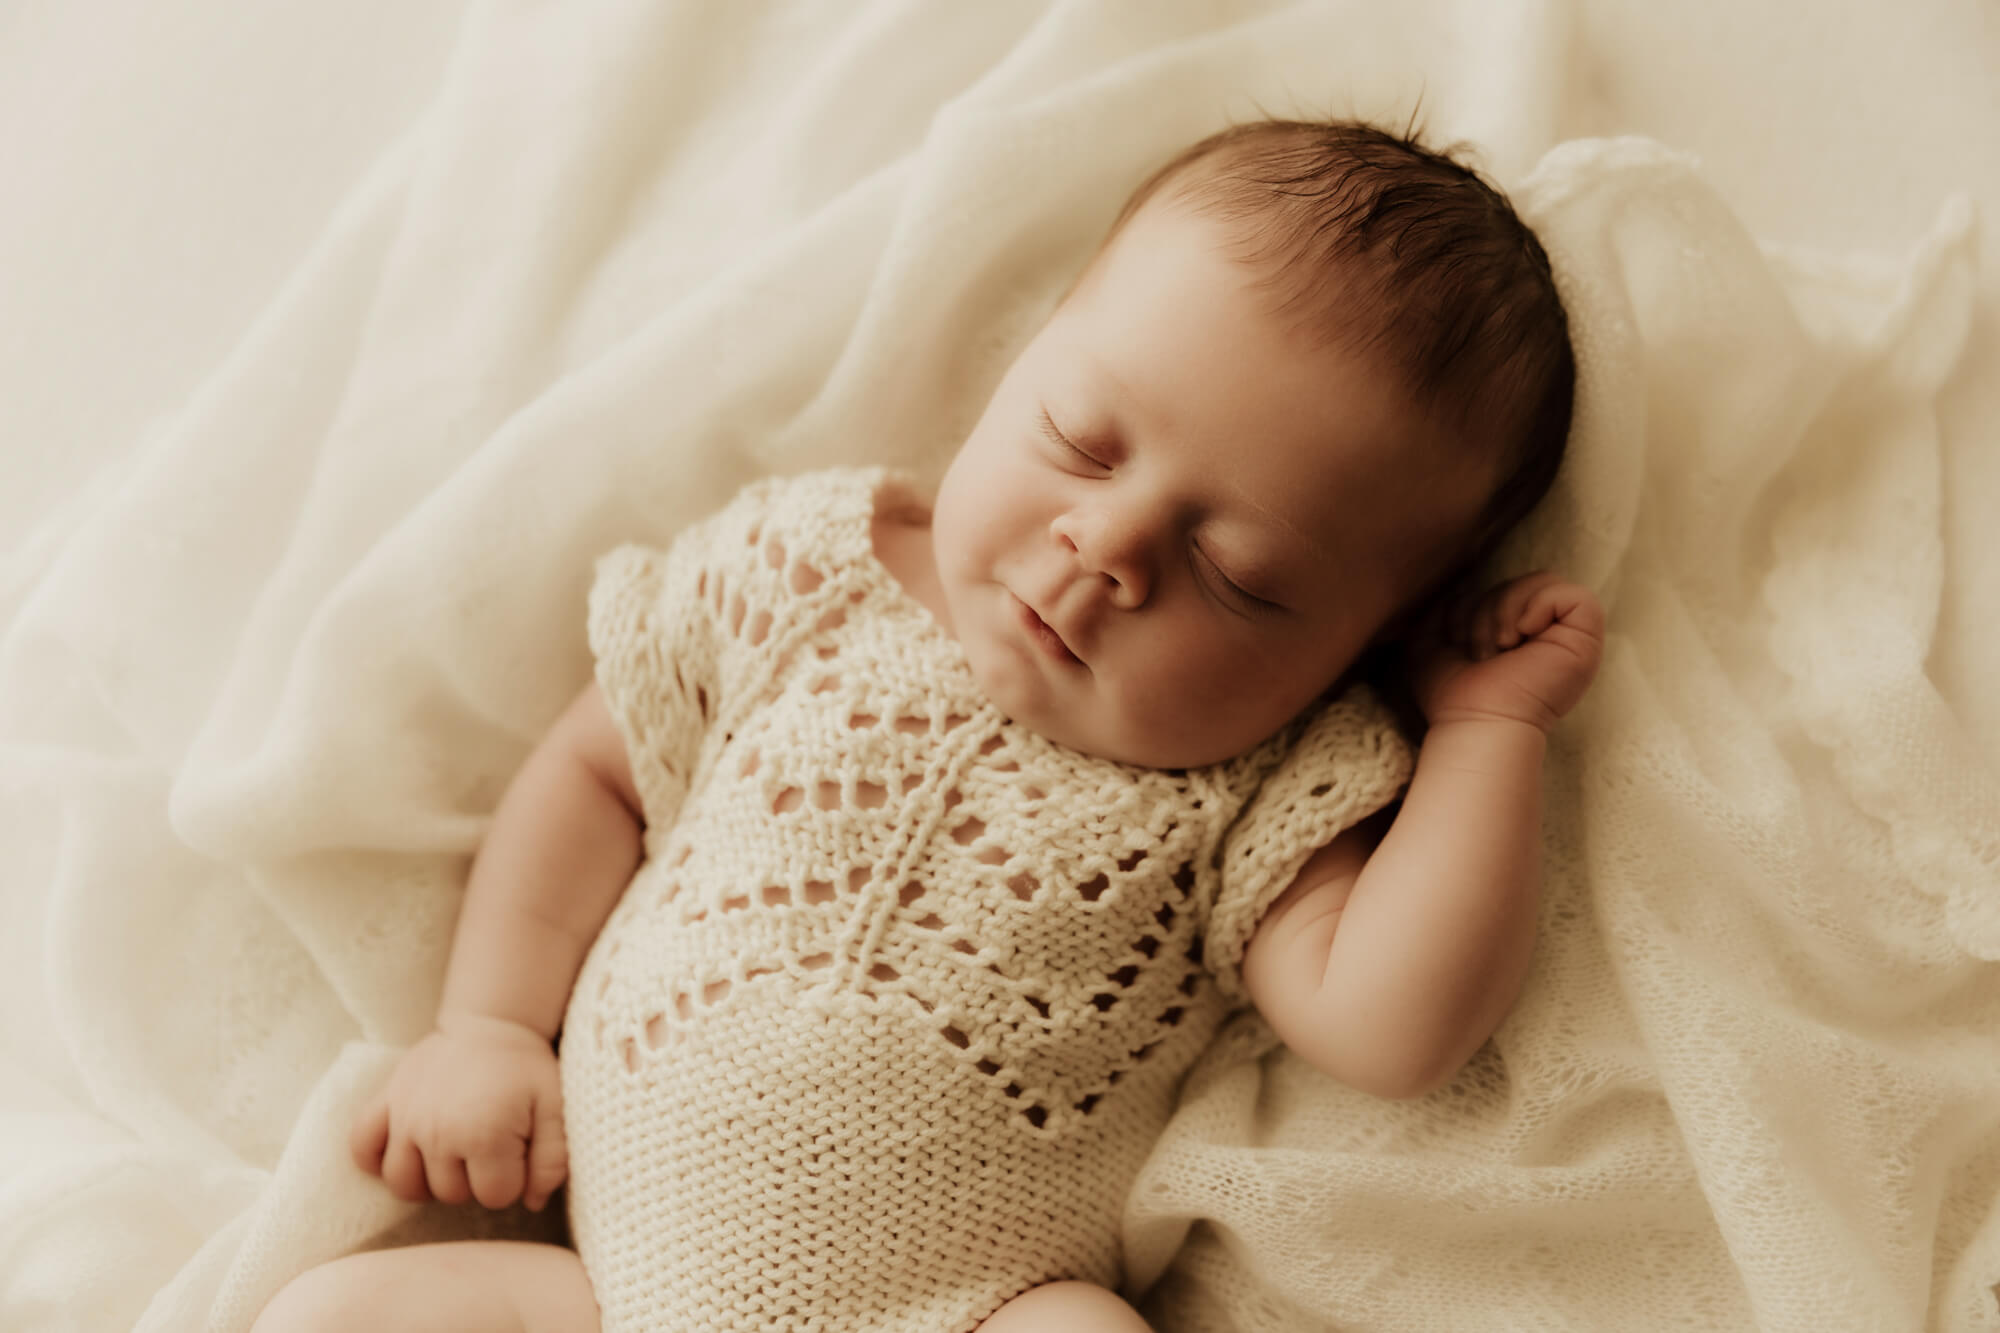 Newborn baby girl sleeping while wearing a cream colored knit romper.